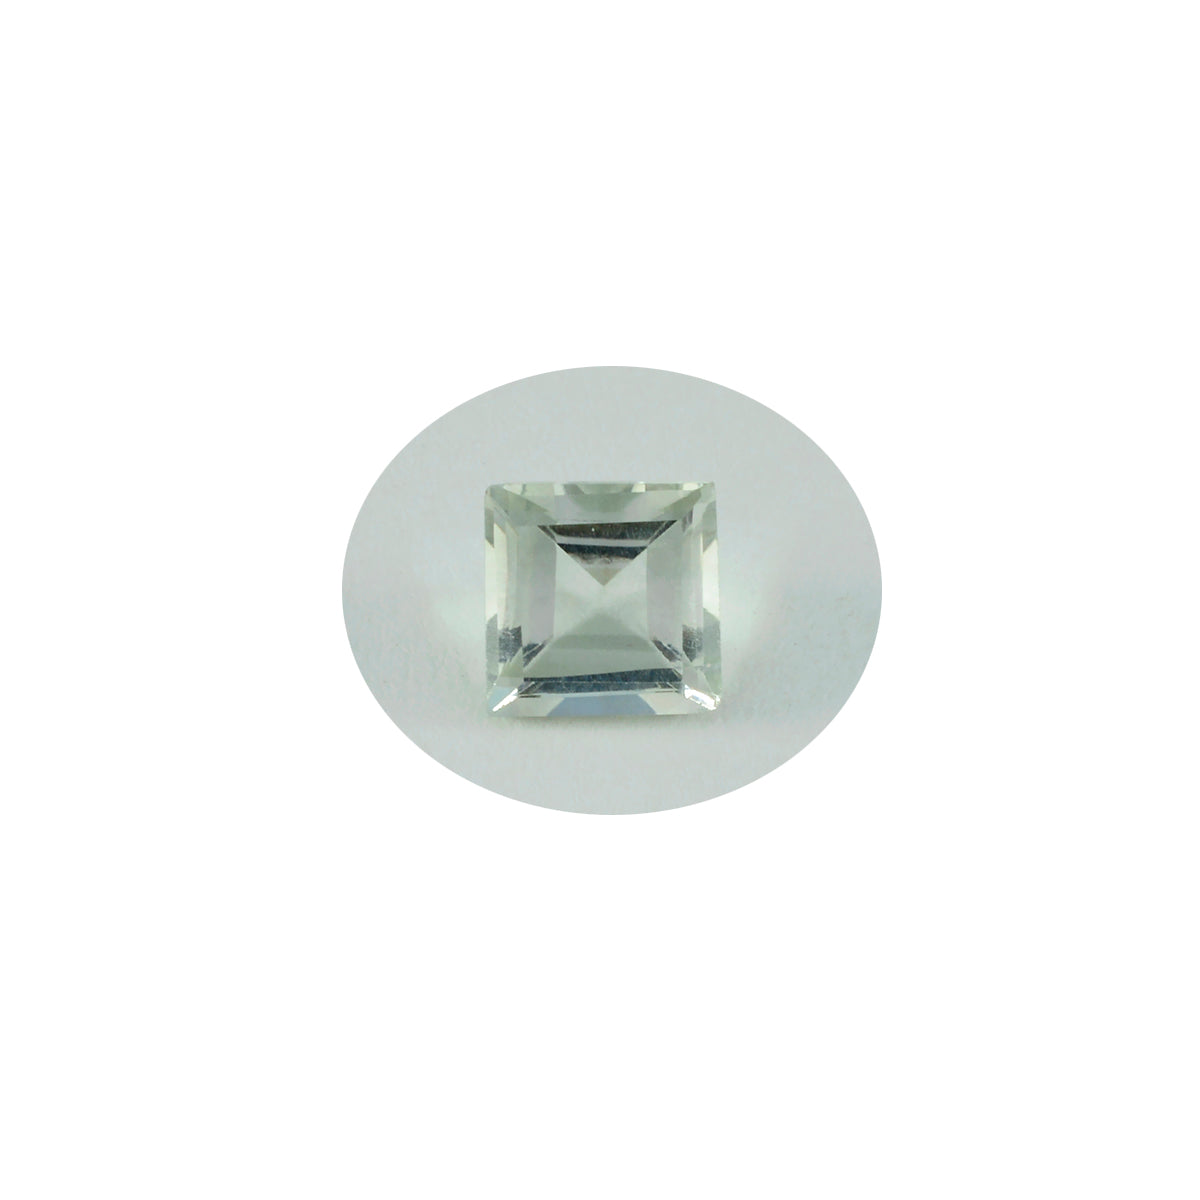 Riyogems 1PC Green Amethyst Faceted 14x14 mm Square Shape A+1 Quality Stone